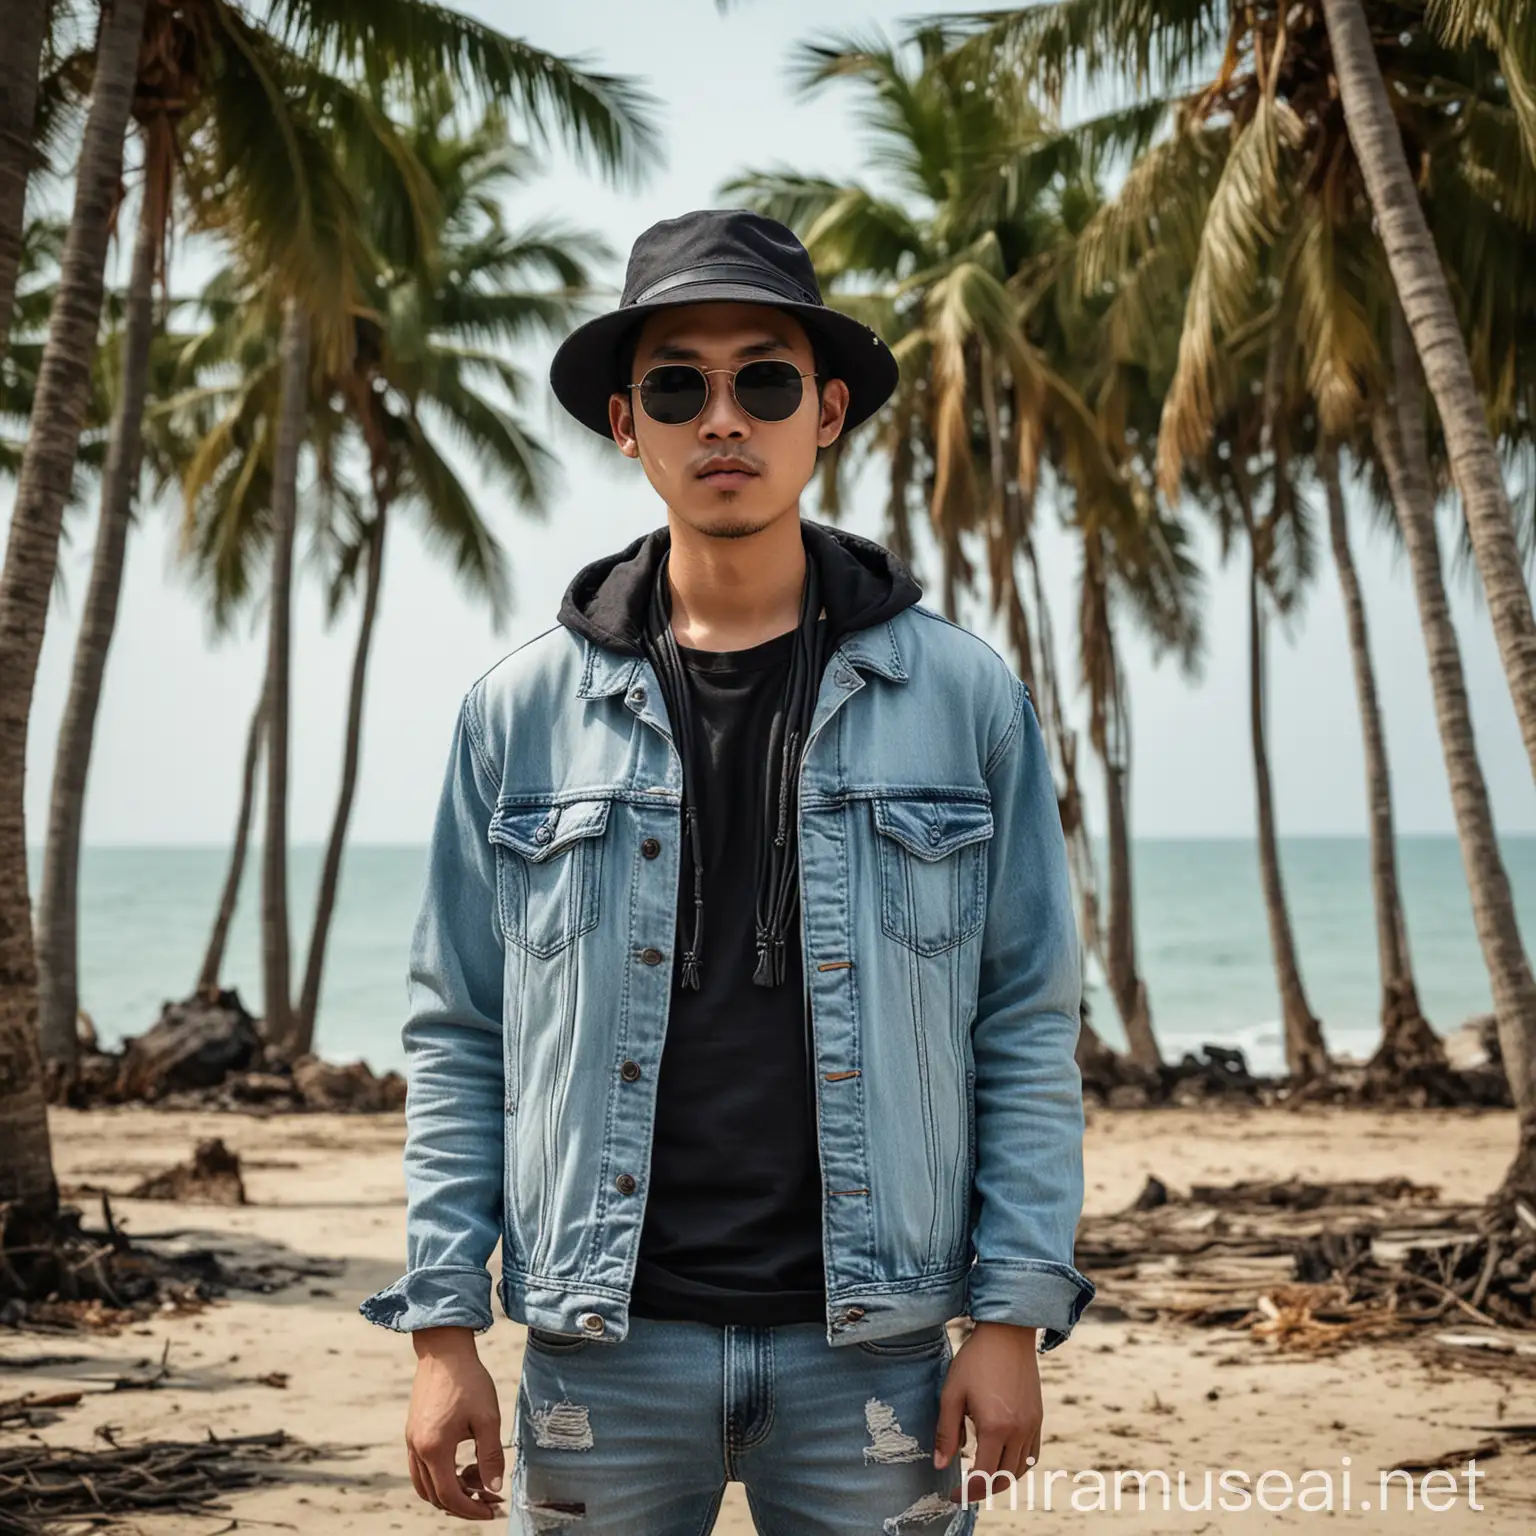 Asian Man in Stylish Beach Attire with Coconut Trees Background